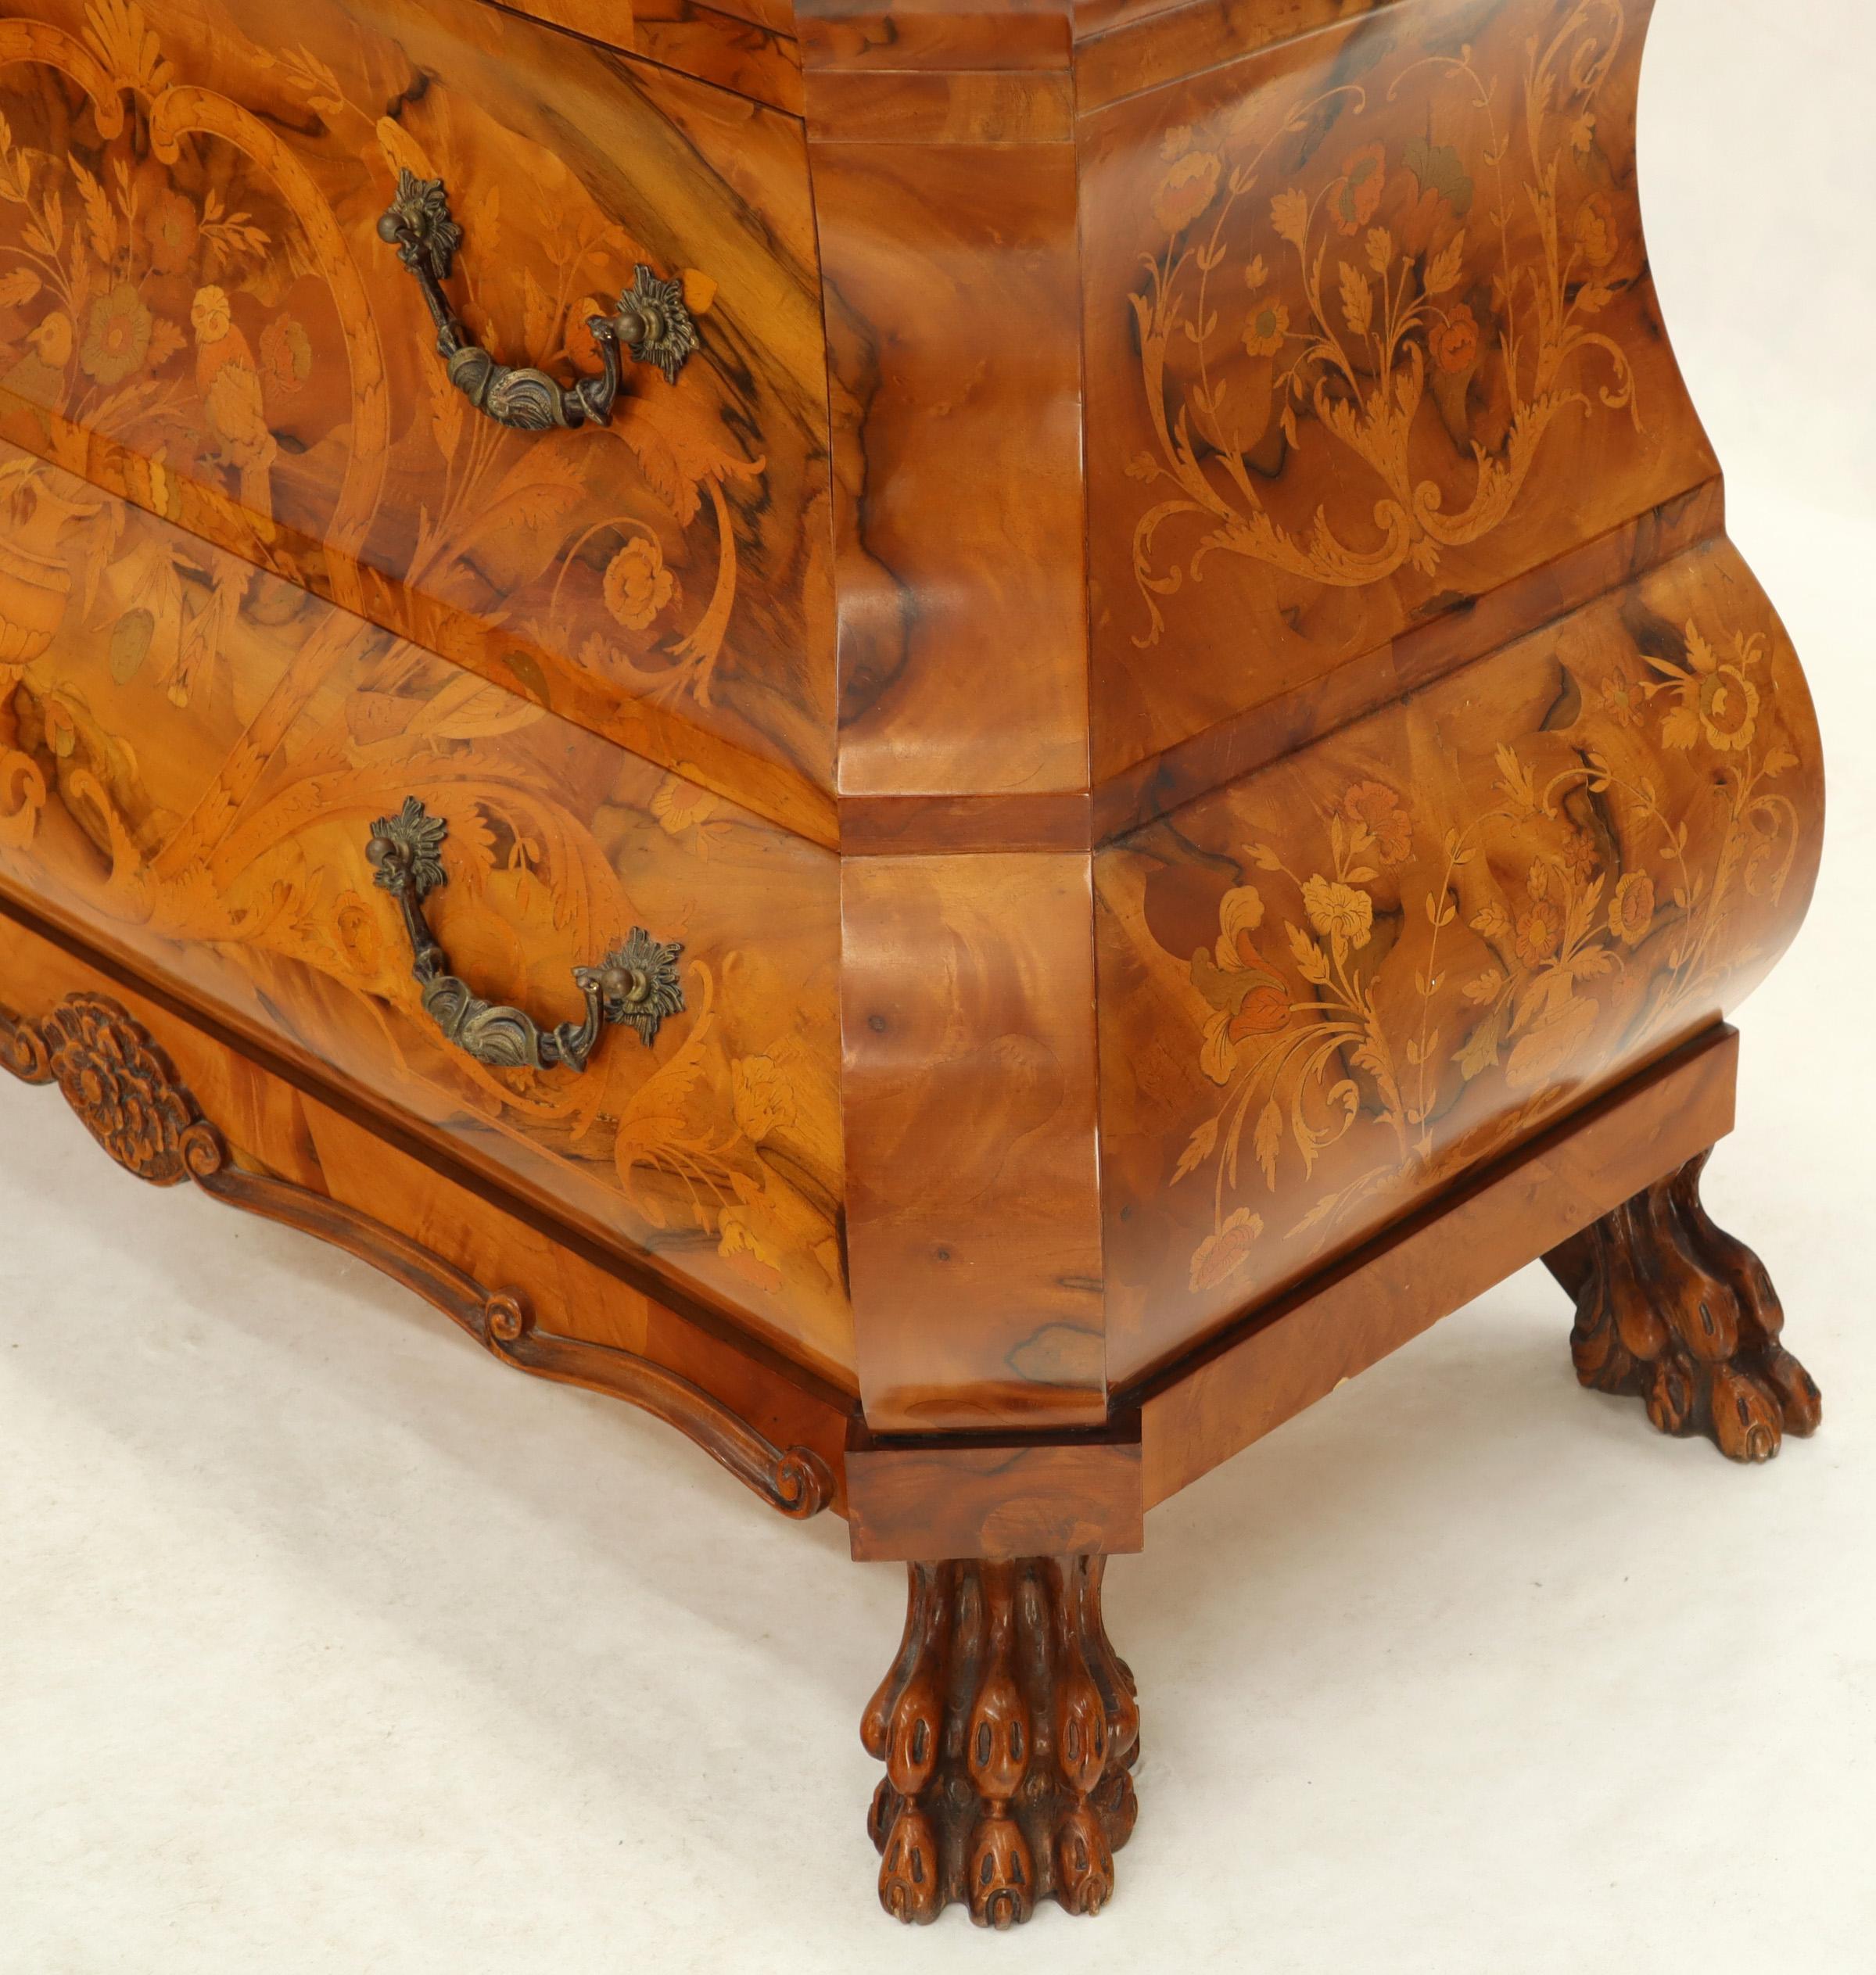 Very fine Italian inlay bombe dresser. Olive wood, heavy carved claw feet, intricate inlay, drop front jewelry secretary compartment.
Excellent vintage condition. Stunning piece.